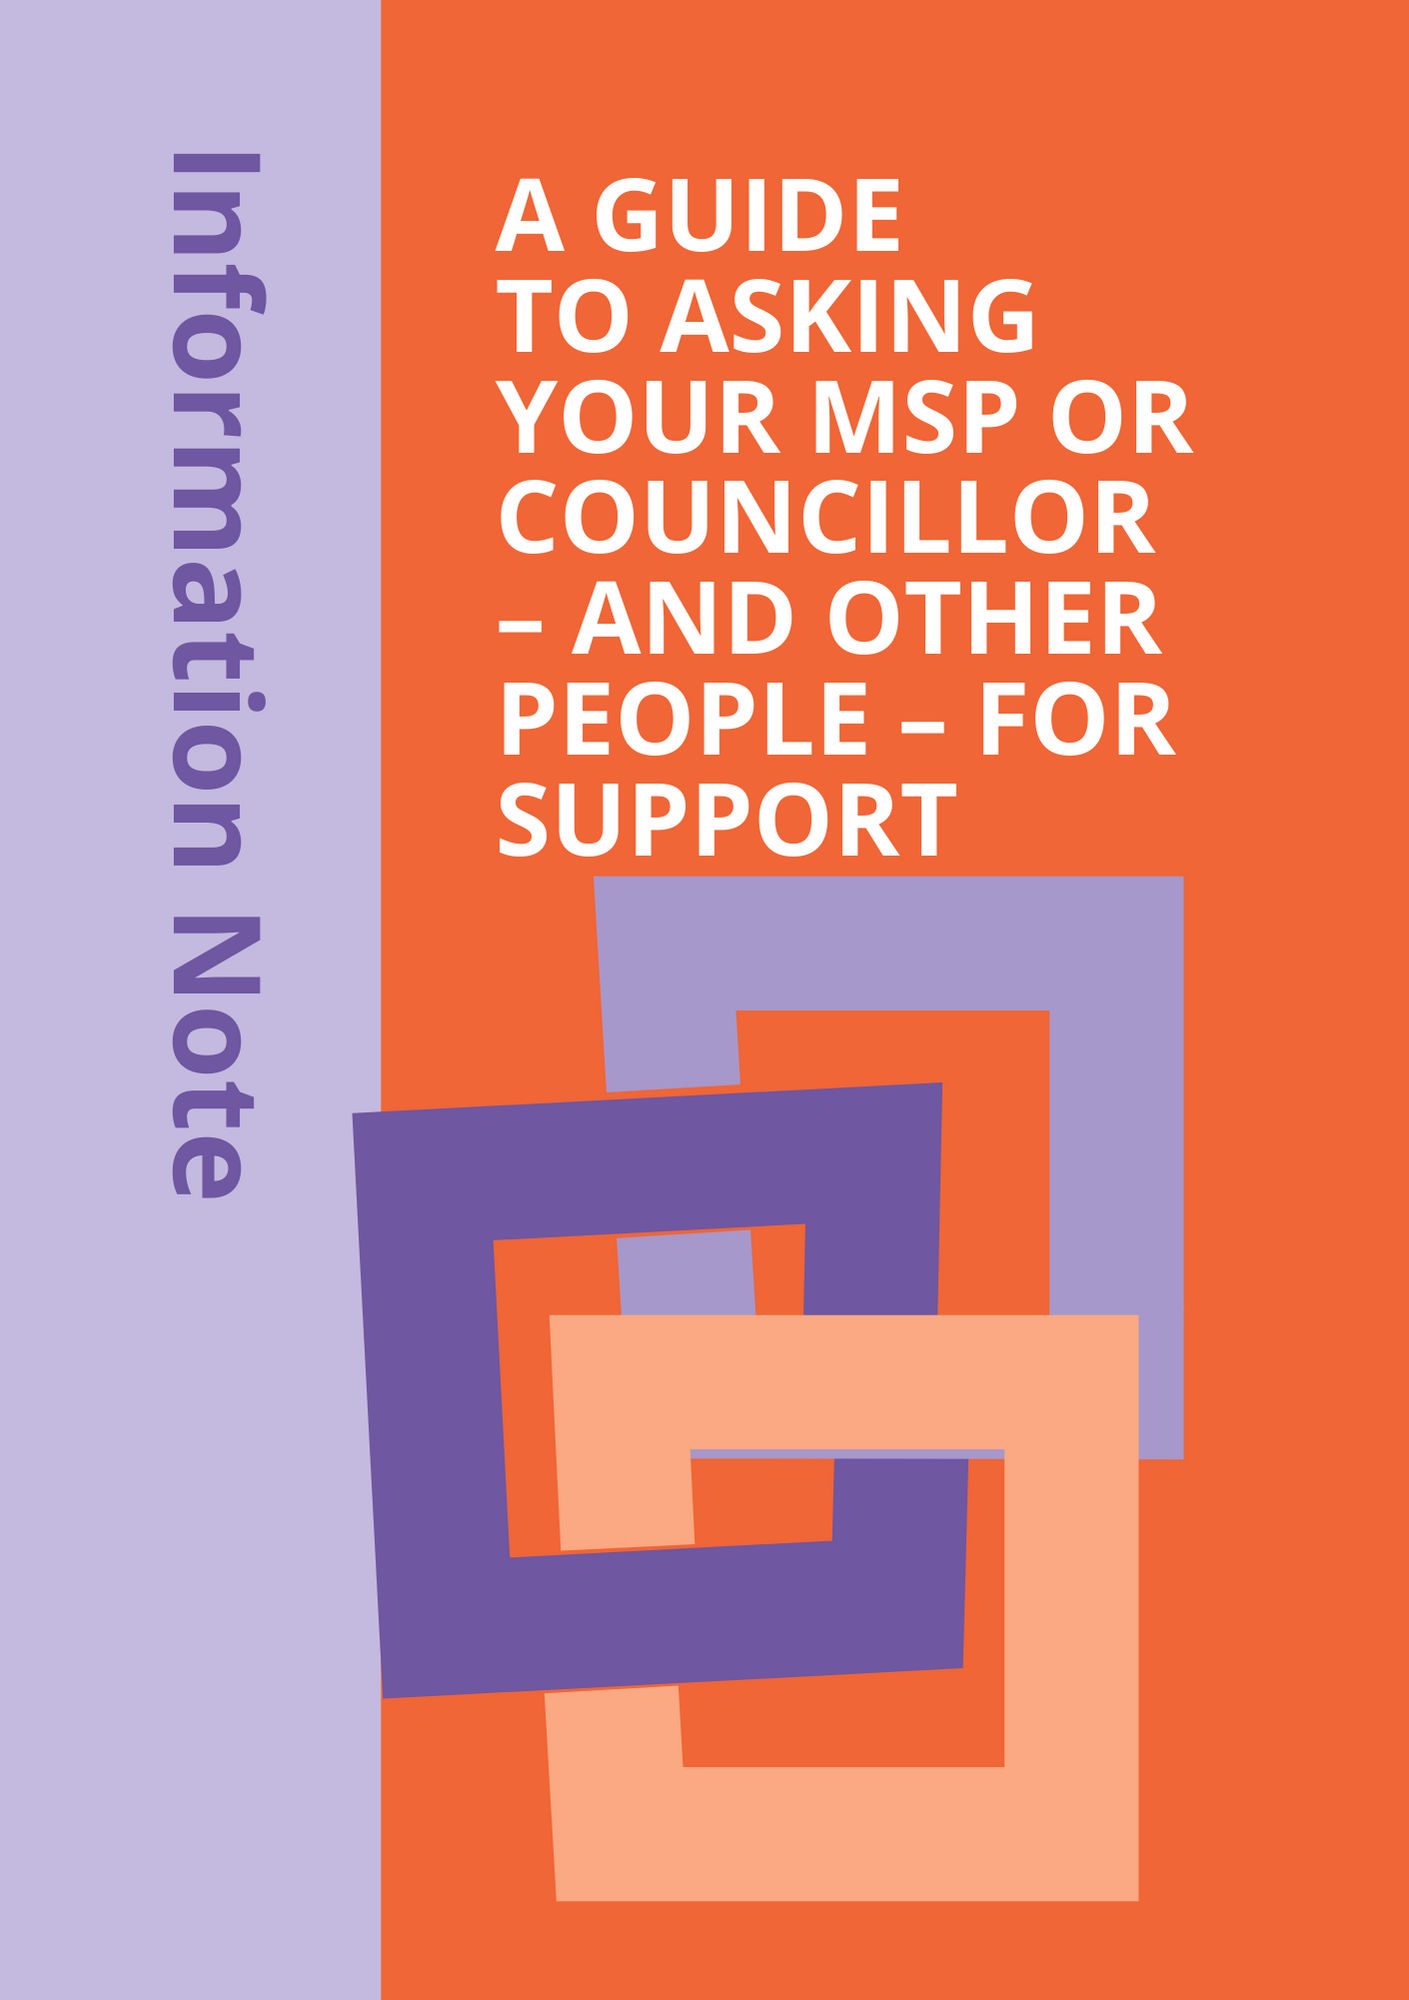 A guide to asking your MSP or councillor - and other people - for support